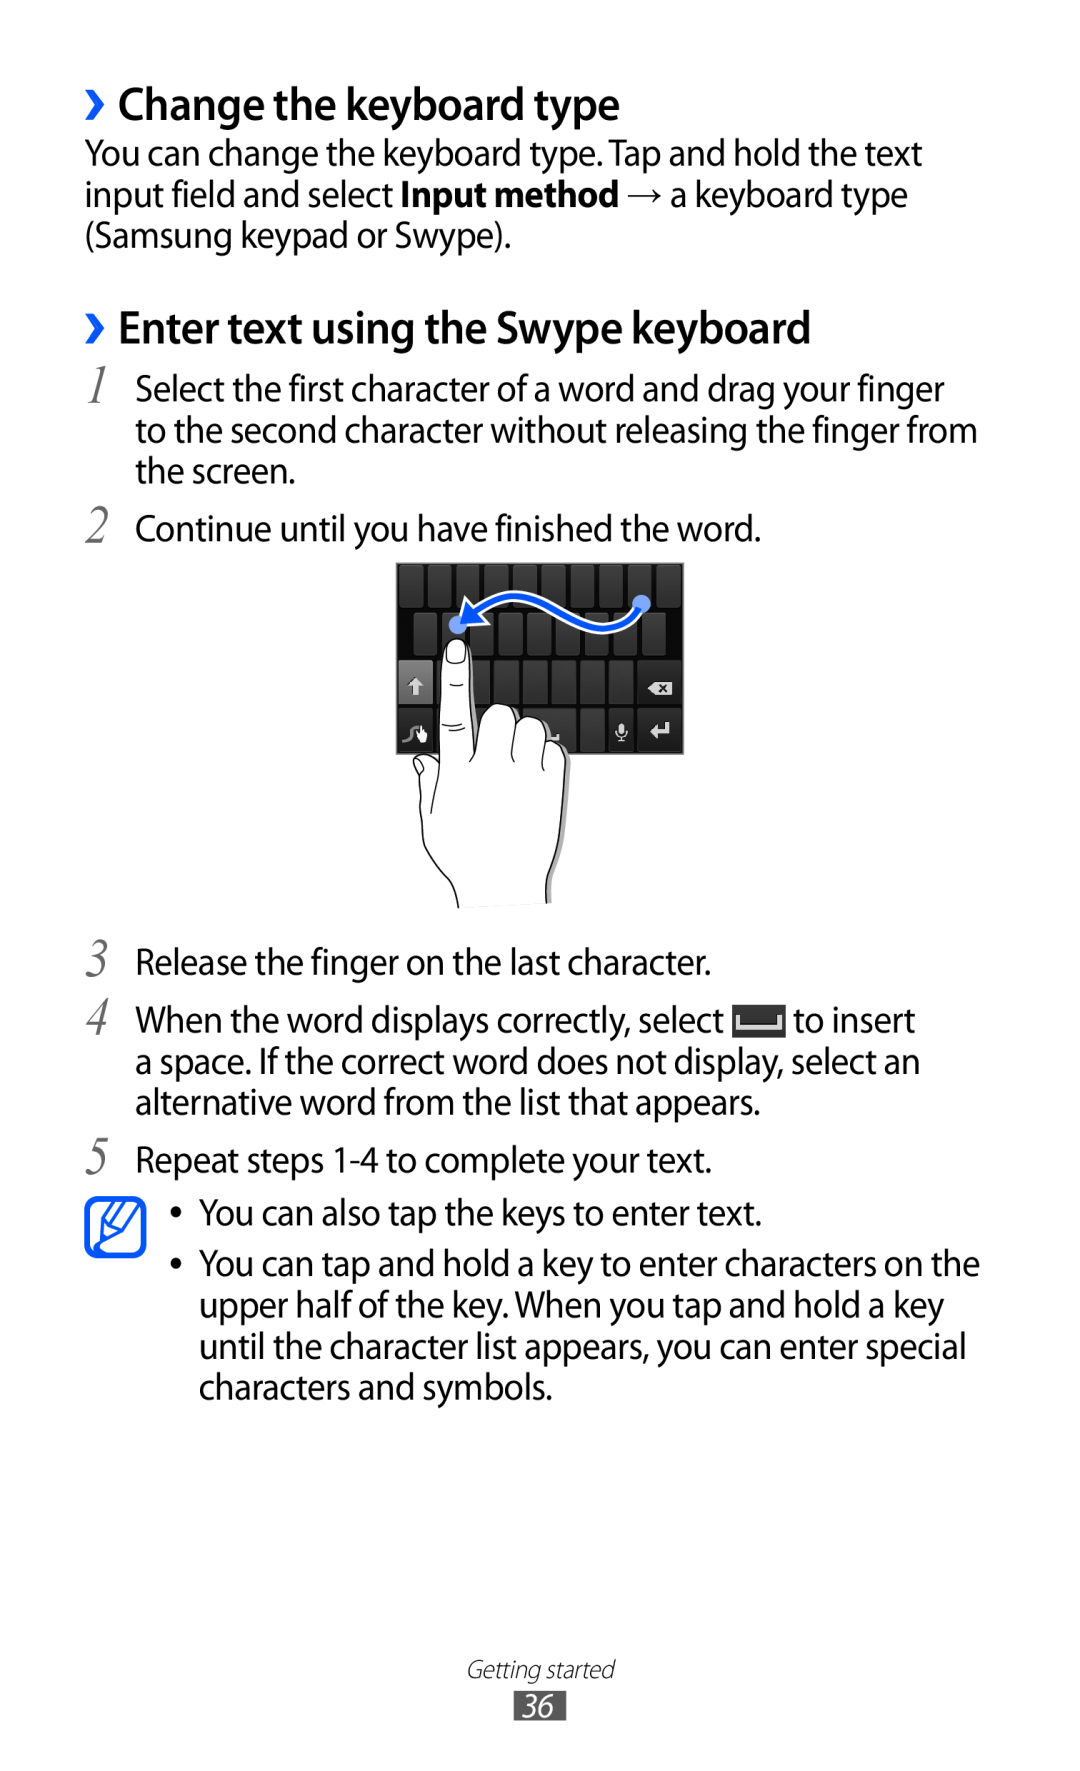 Samsung GT-I9070 user manual ››Change the keyboard type, ››Enter text using the Swype keyboard 